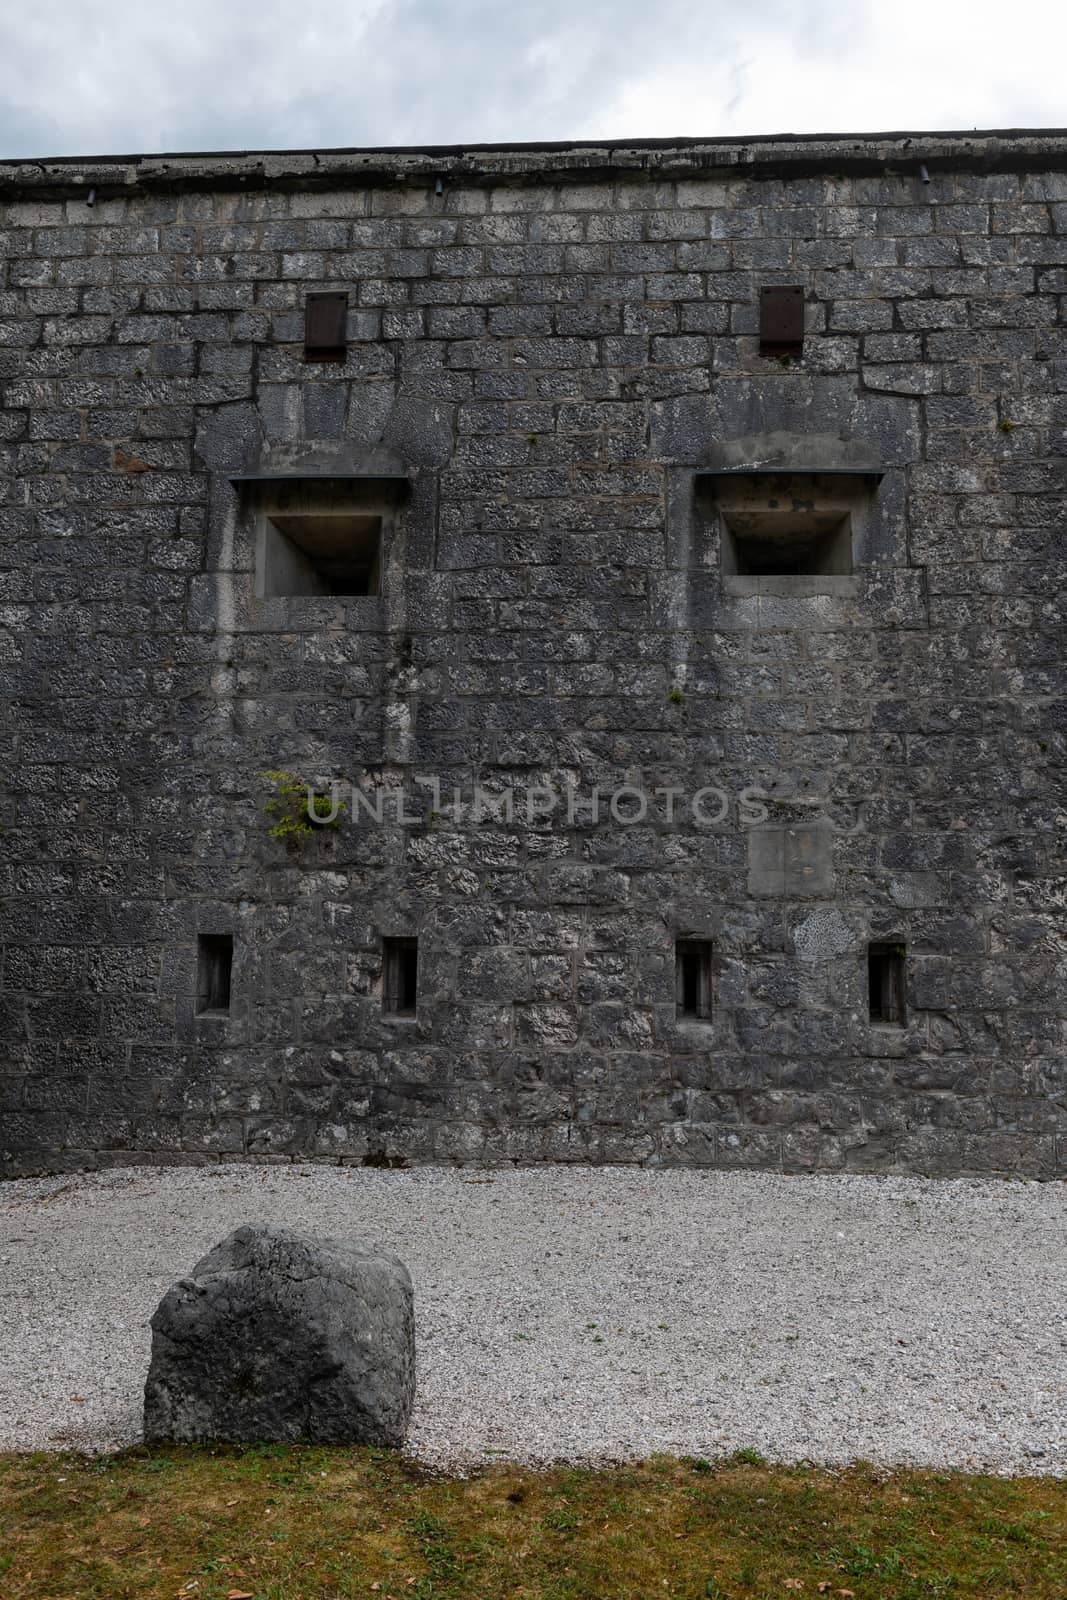 Military fort with stone walls and portholes for riflemen from 19th century, Fort Kluze in Bovec, Slovenia was built by Austrian Army to guard a pass in the Alps